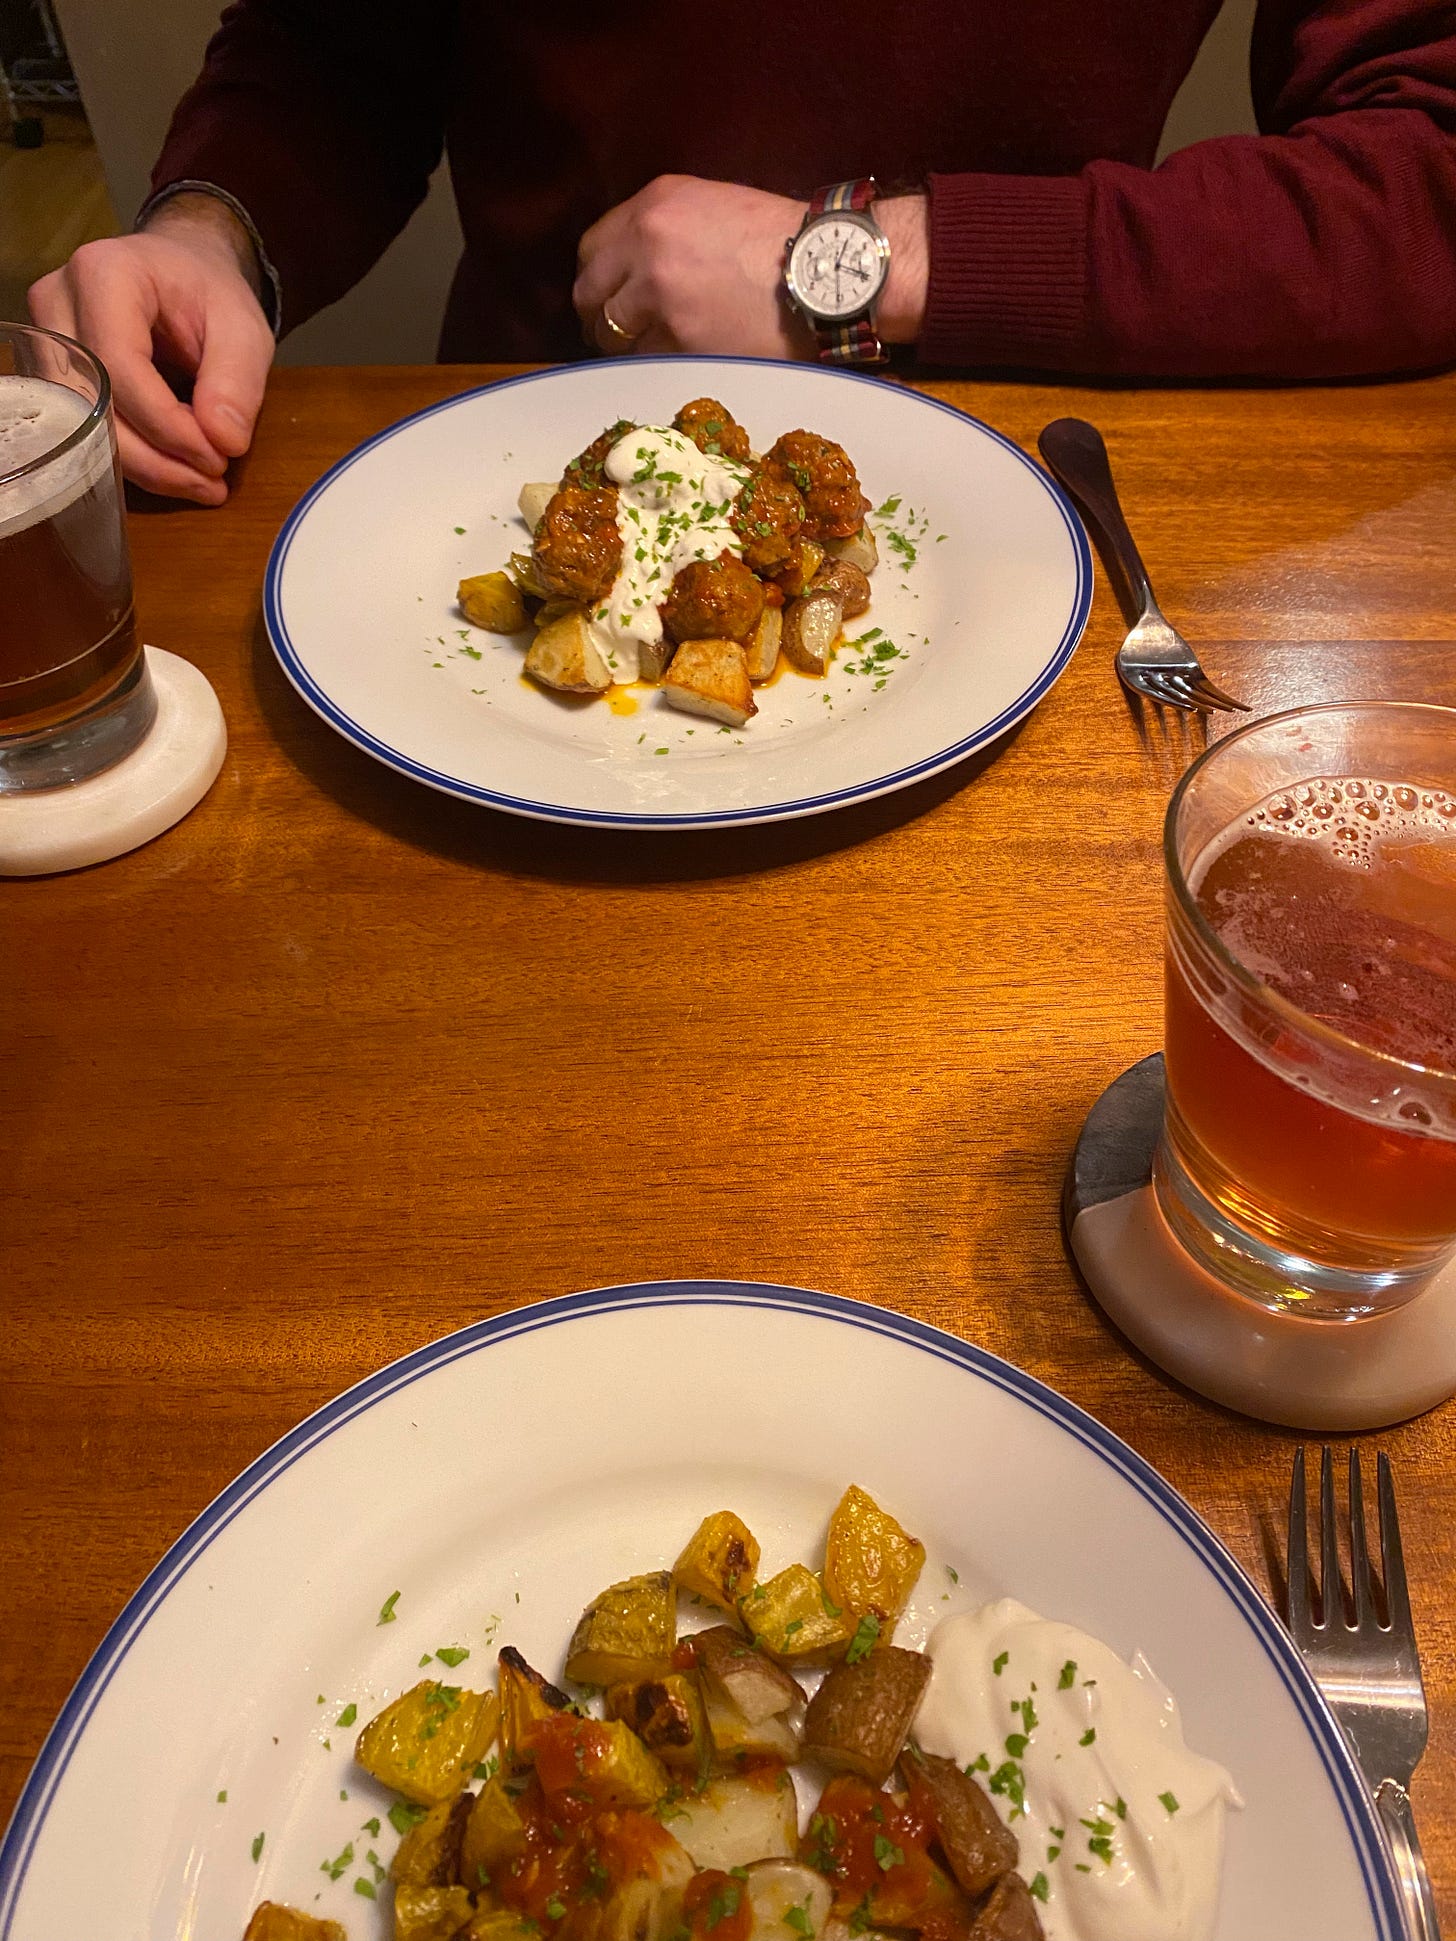 Two plates across from each other on the table, each with roast potatoes, beets, and meatballs in tomato sauce. The dish is garnished with parsley and mint and a dollop of garlic yogurt. Glasses of amber lager sit on coasters at the edges of the plates.